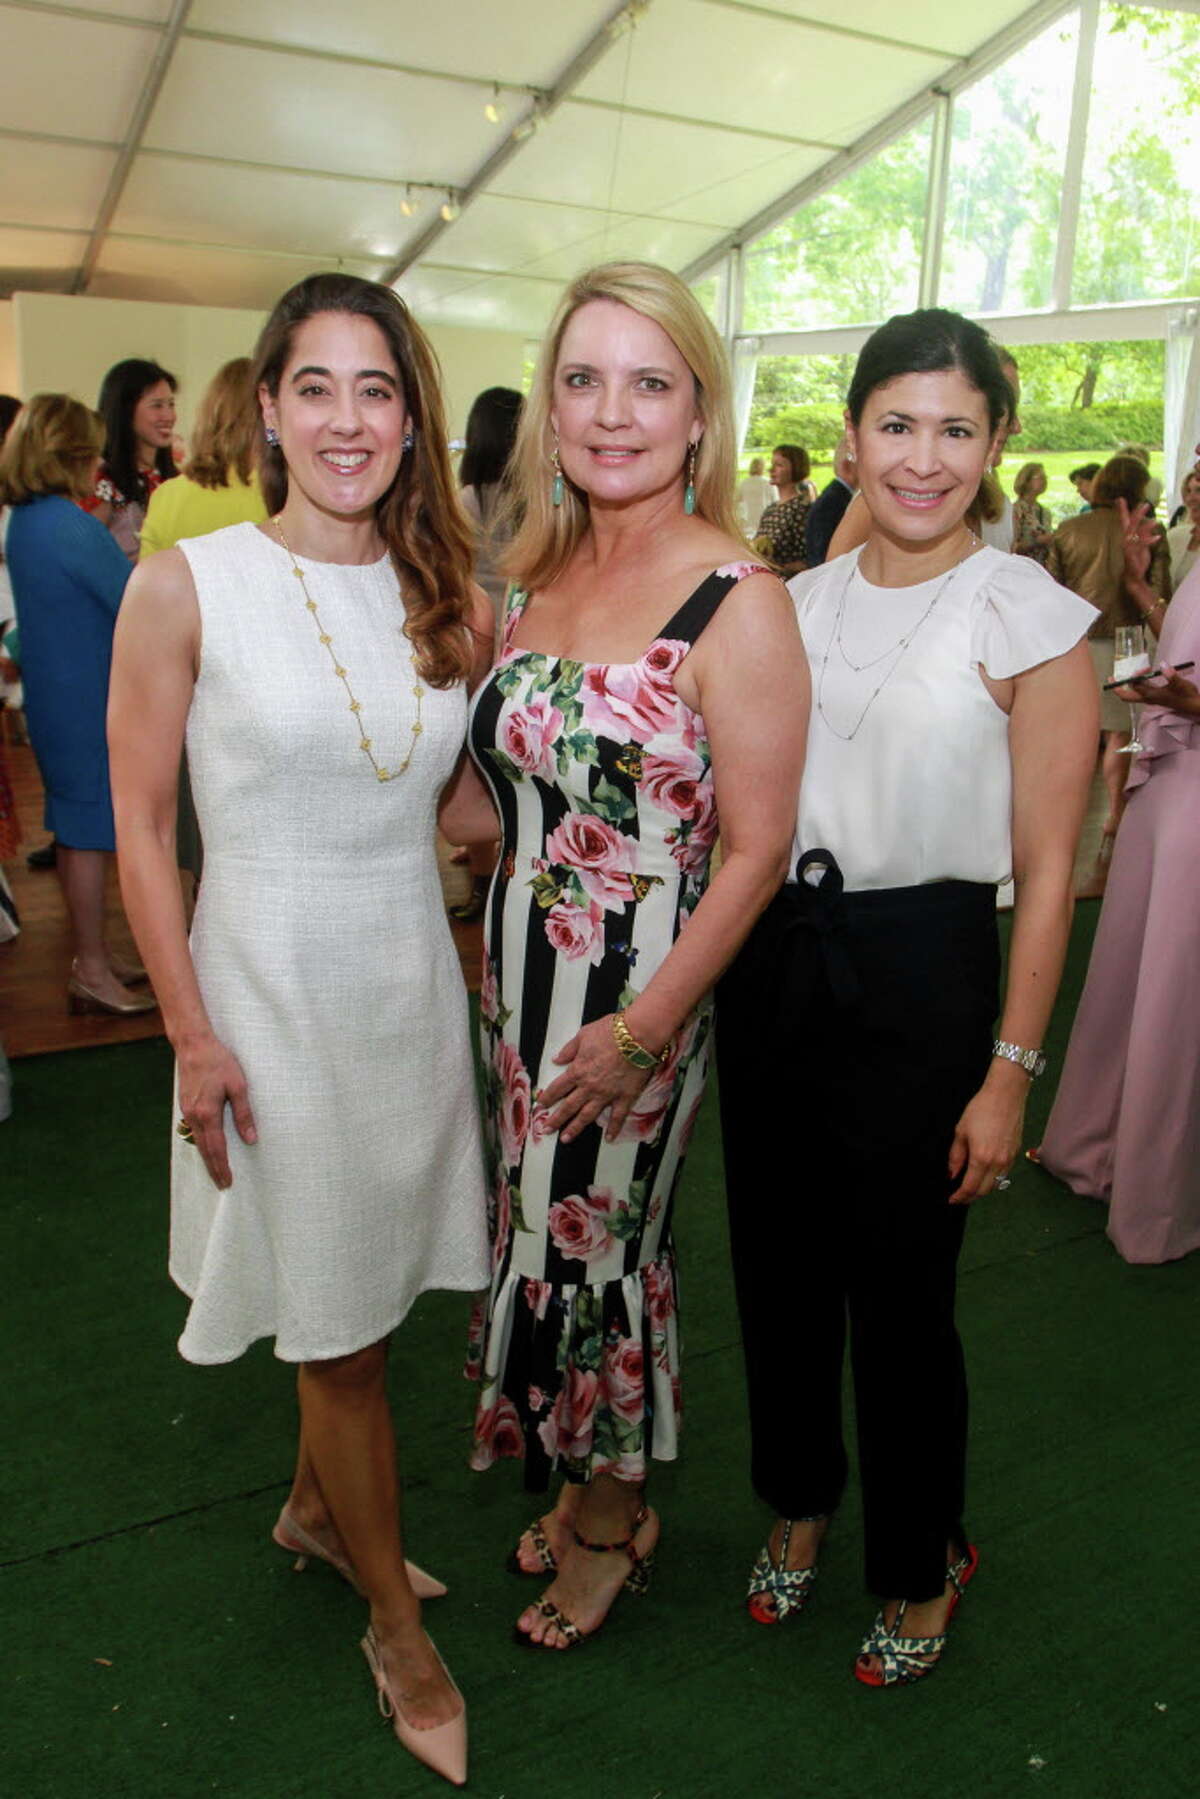 Kristina Somerville, from left, Melissa Juneau and Kristy Bradshaw at the Bayou Bend Luncheon and Fashion Show.